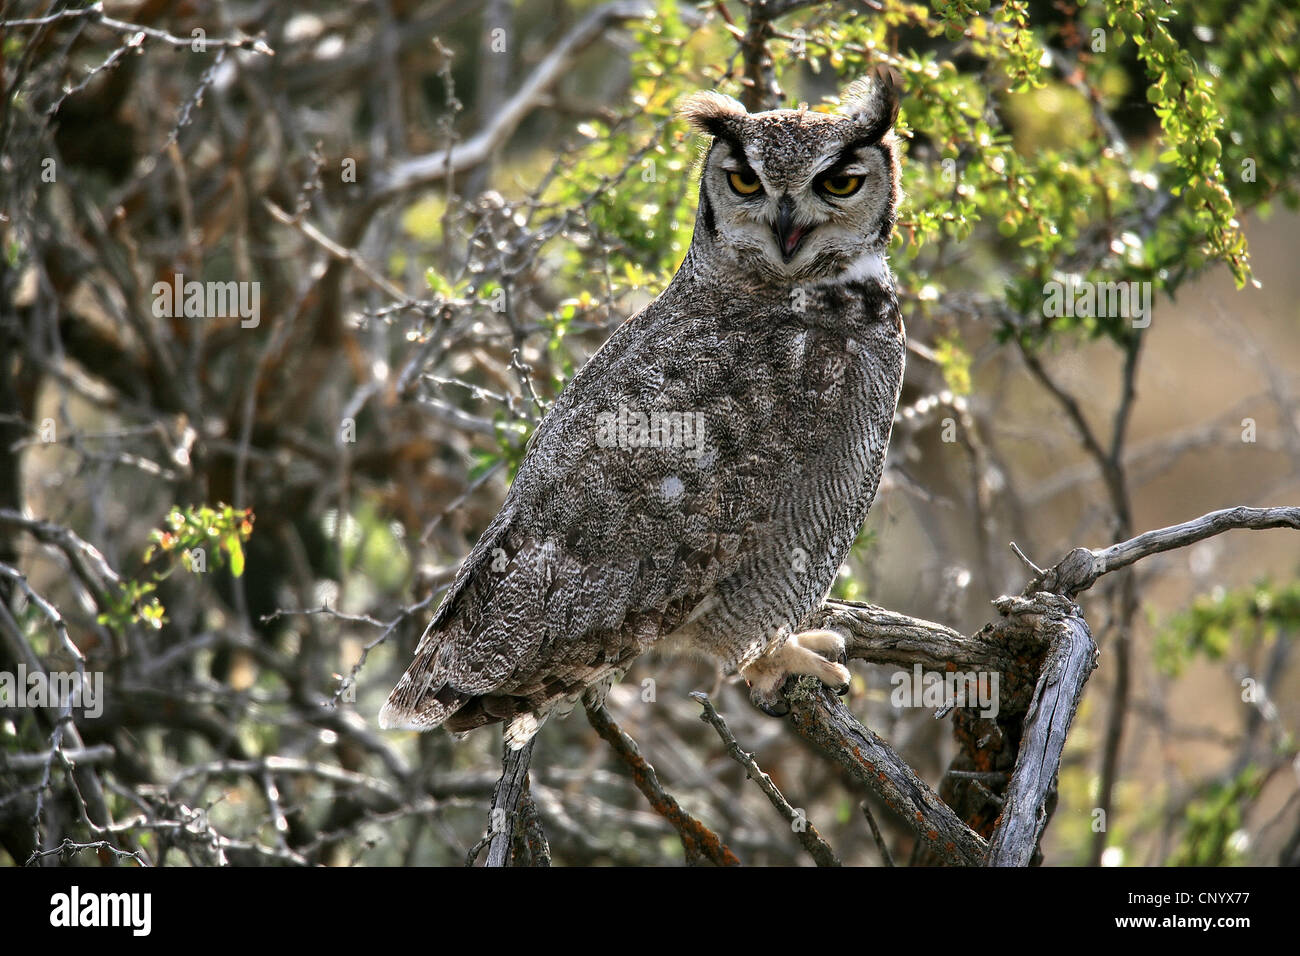 Lesser Horned Owl, Magellanic Horned Owl  (Bubo magellanicus), sitting on a branch, Chile, Patagonia Stock Photo